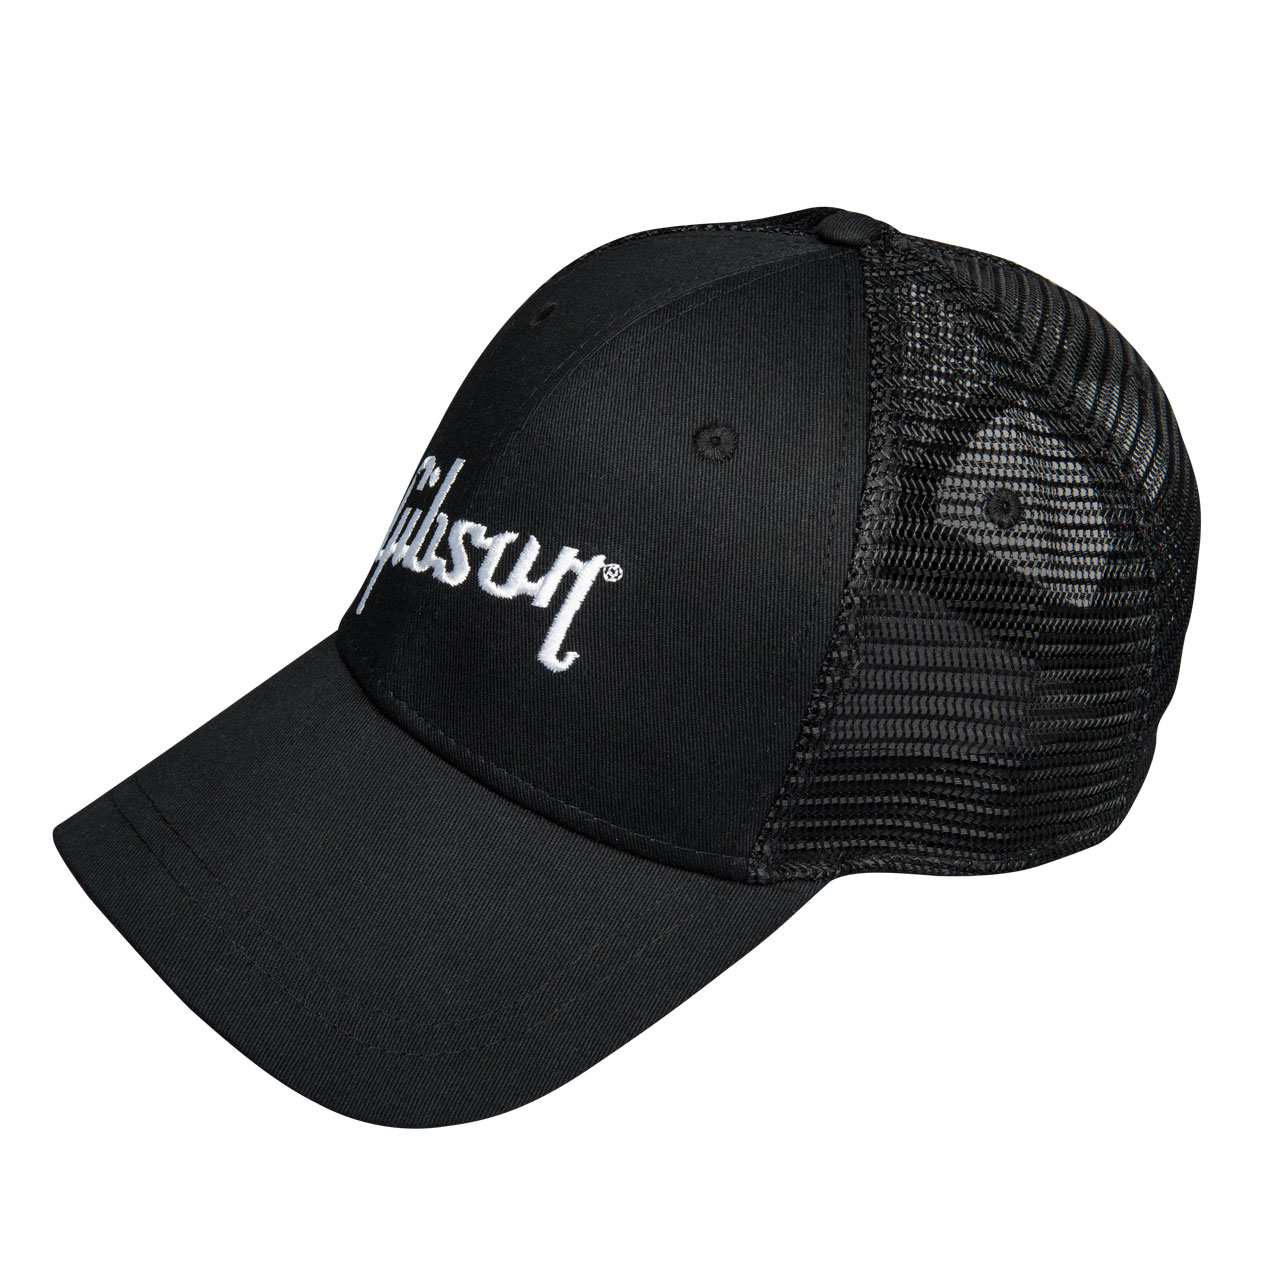 GIBSON ACCESSORIES LIFESTYLE CASQUETTES BLACK TRUCKER SNAPBACK